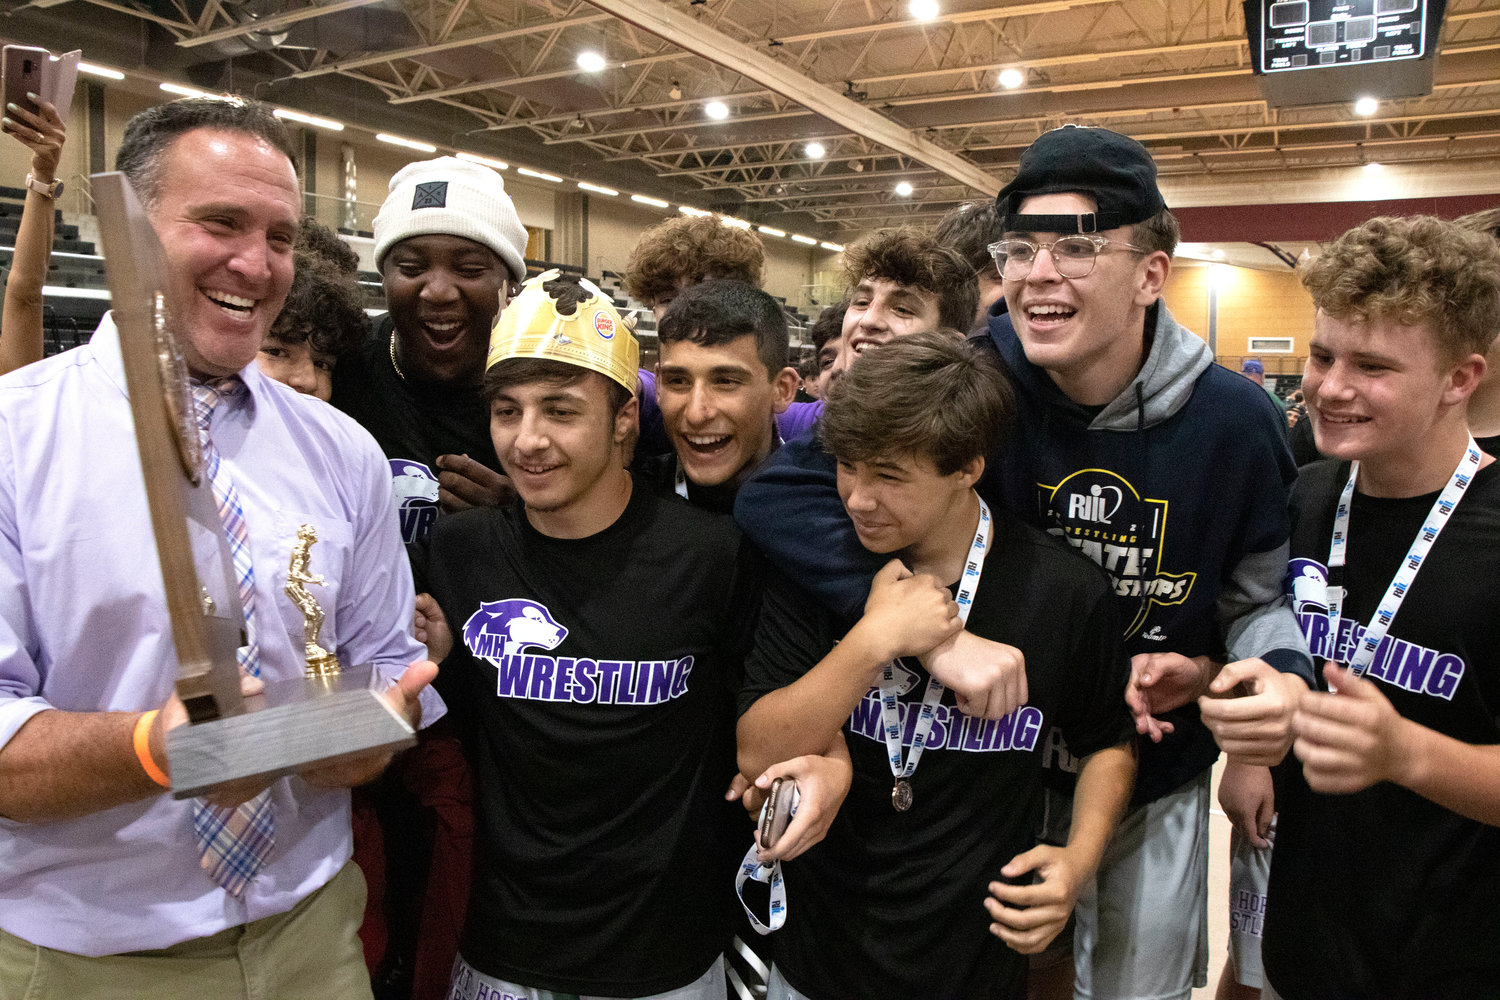 Coach Eric Francis shows the team the state championship trophy after their team victory during the wrestling state tournament on Saturday.